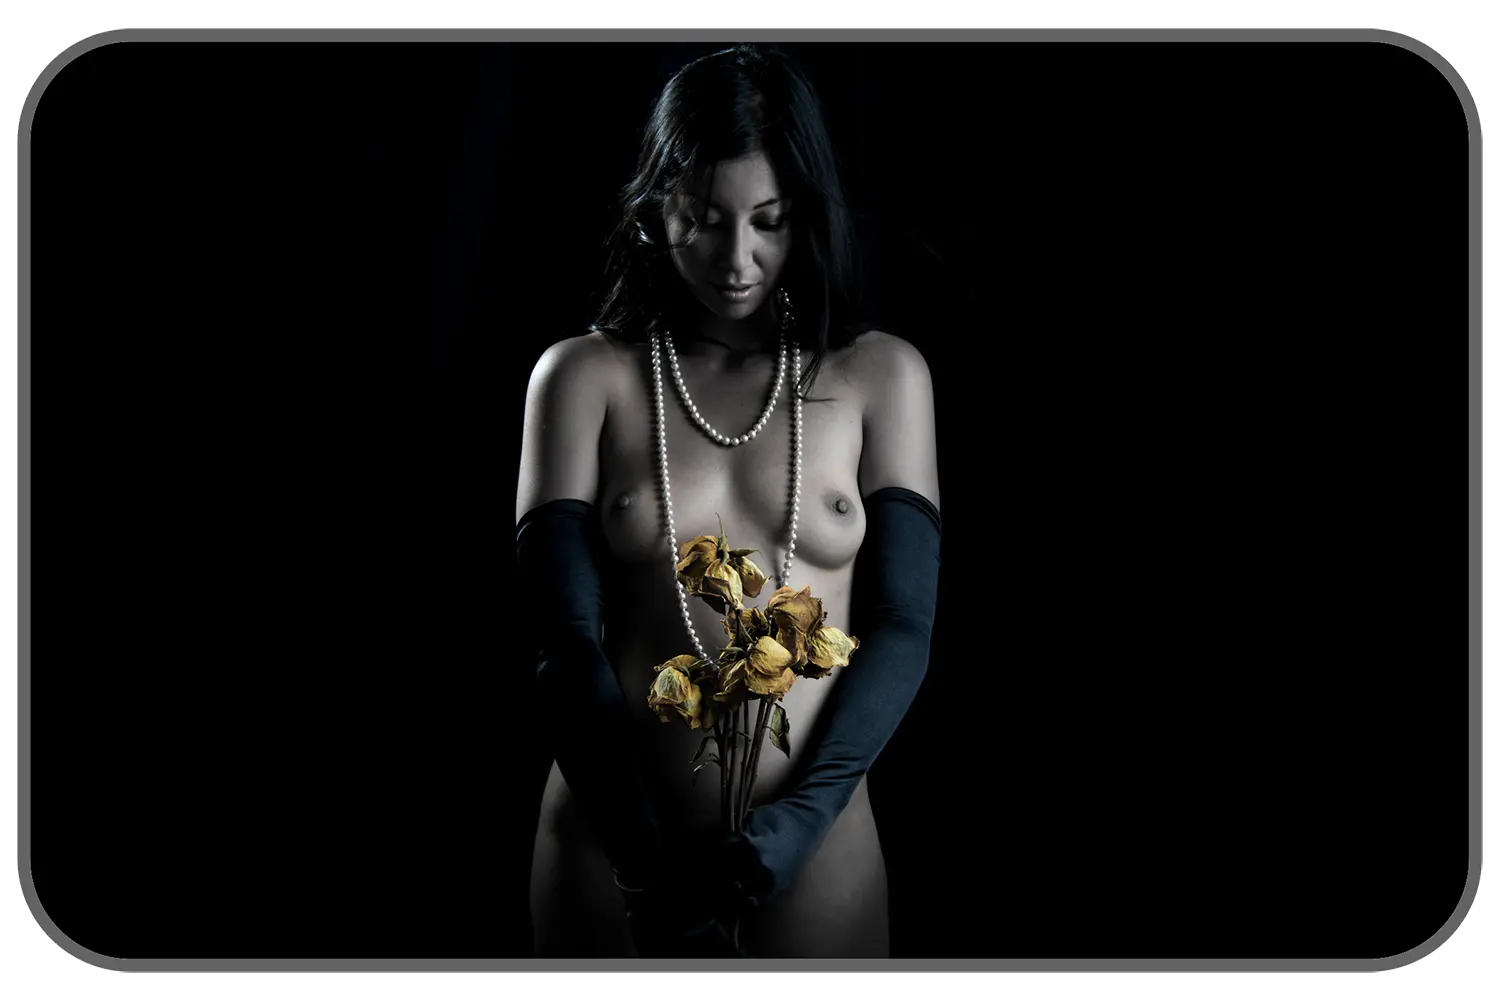 Nude woman wearing gloves and holding flowers